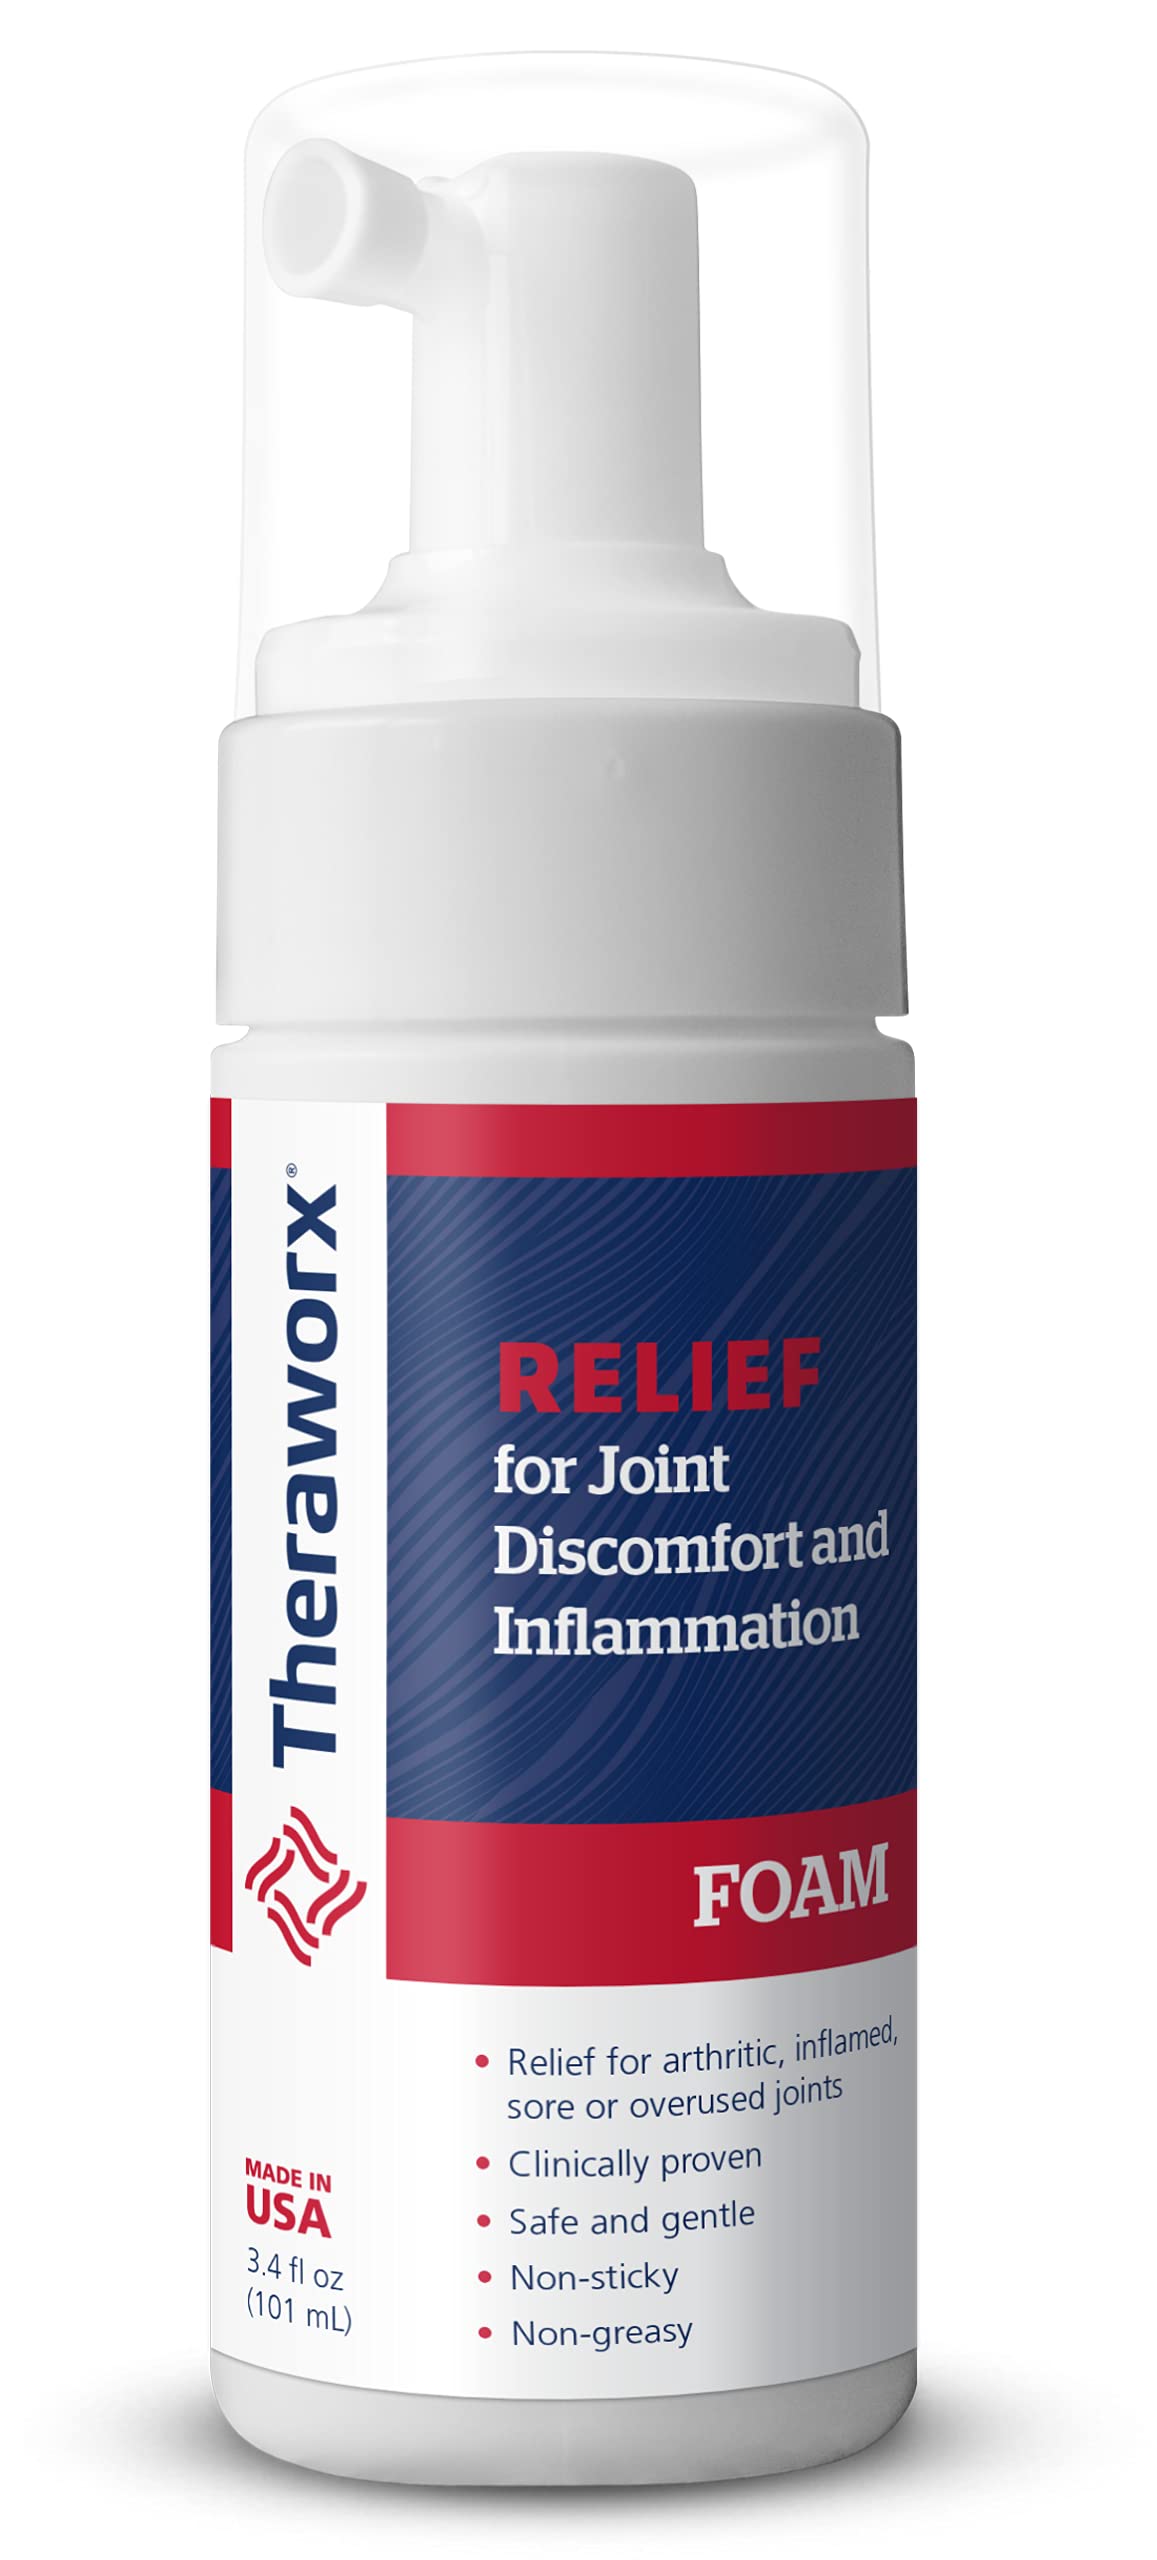 THERAWORX RELIEF Joint Discomfort & Inflammation Foam for Joints in The Knees and Hands - 3.4 oz - 1 Count